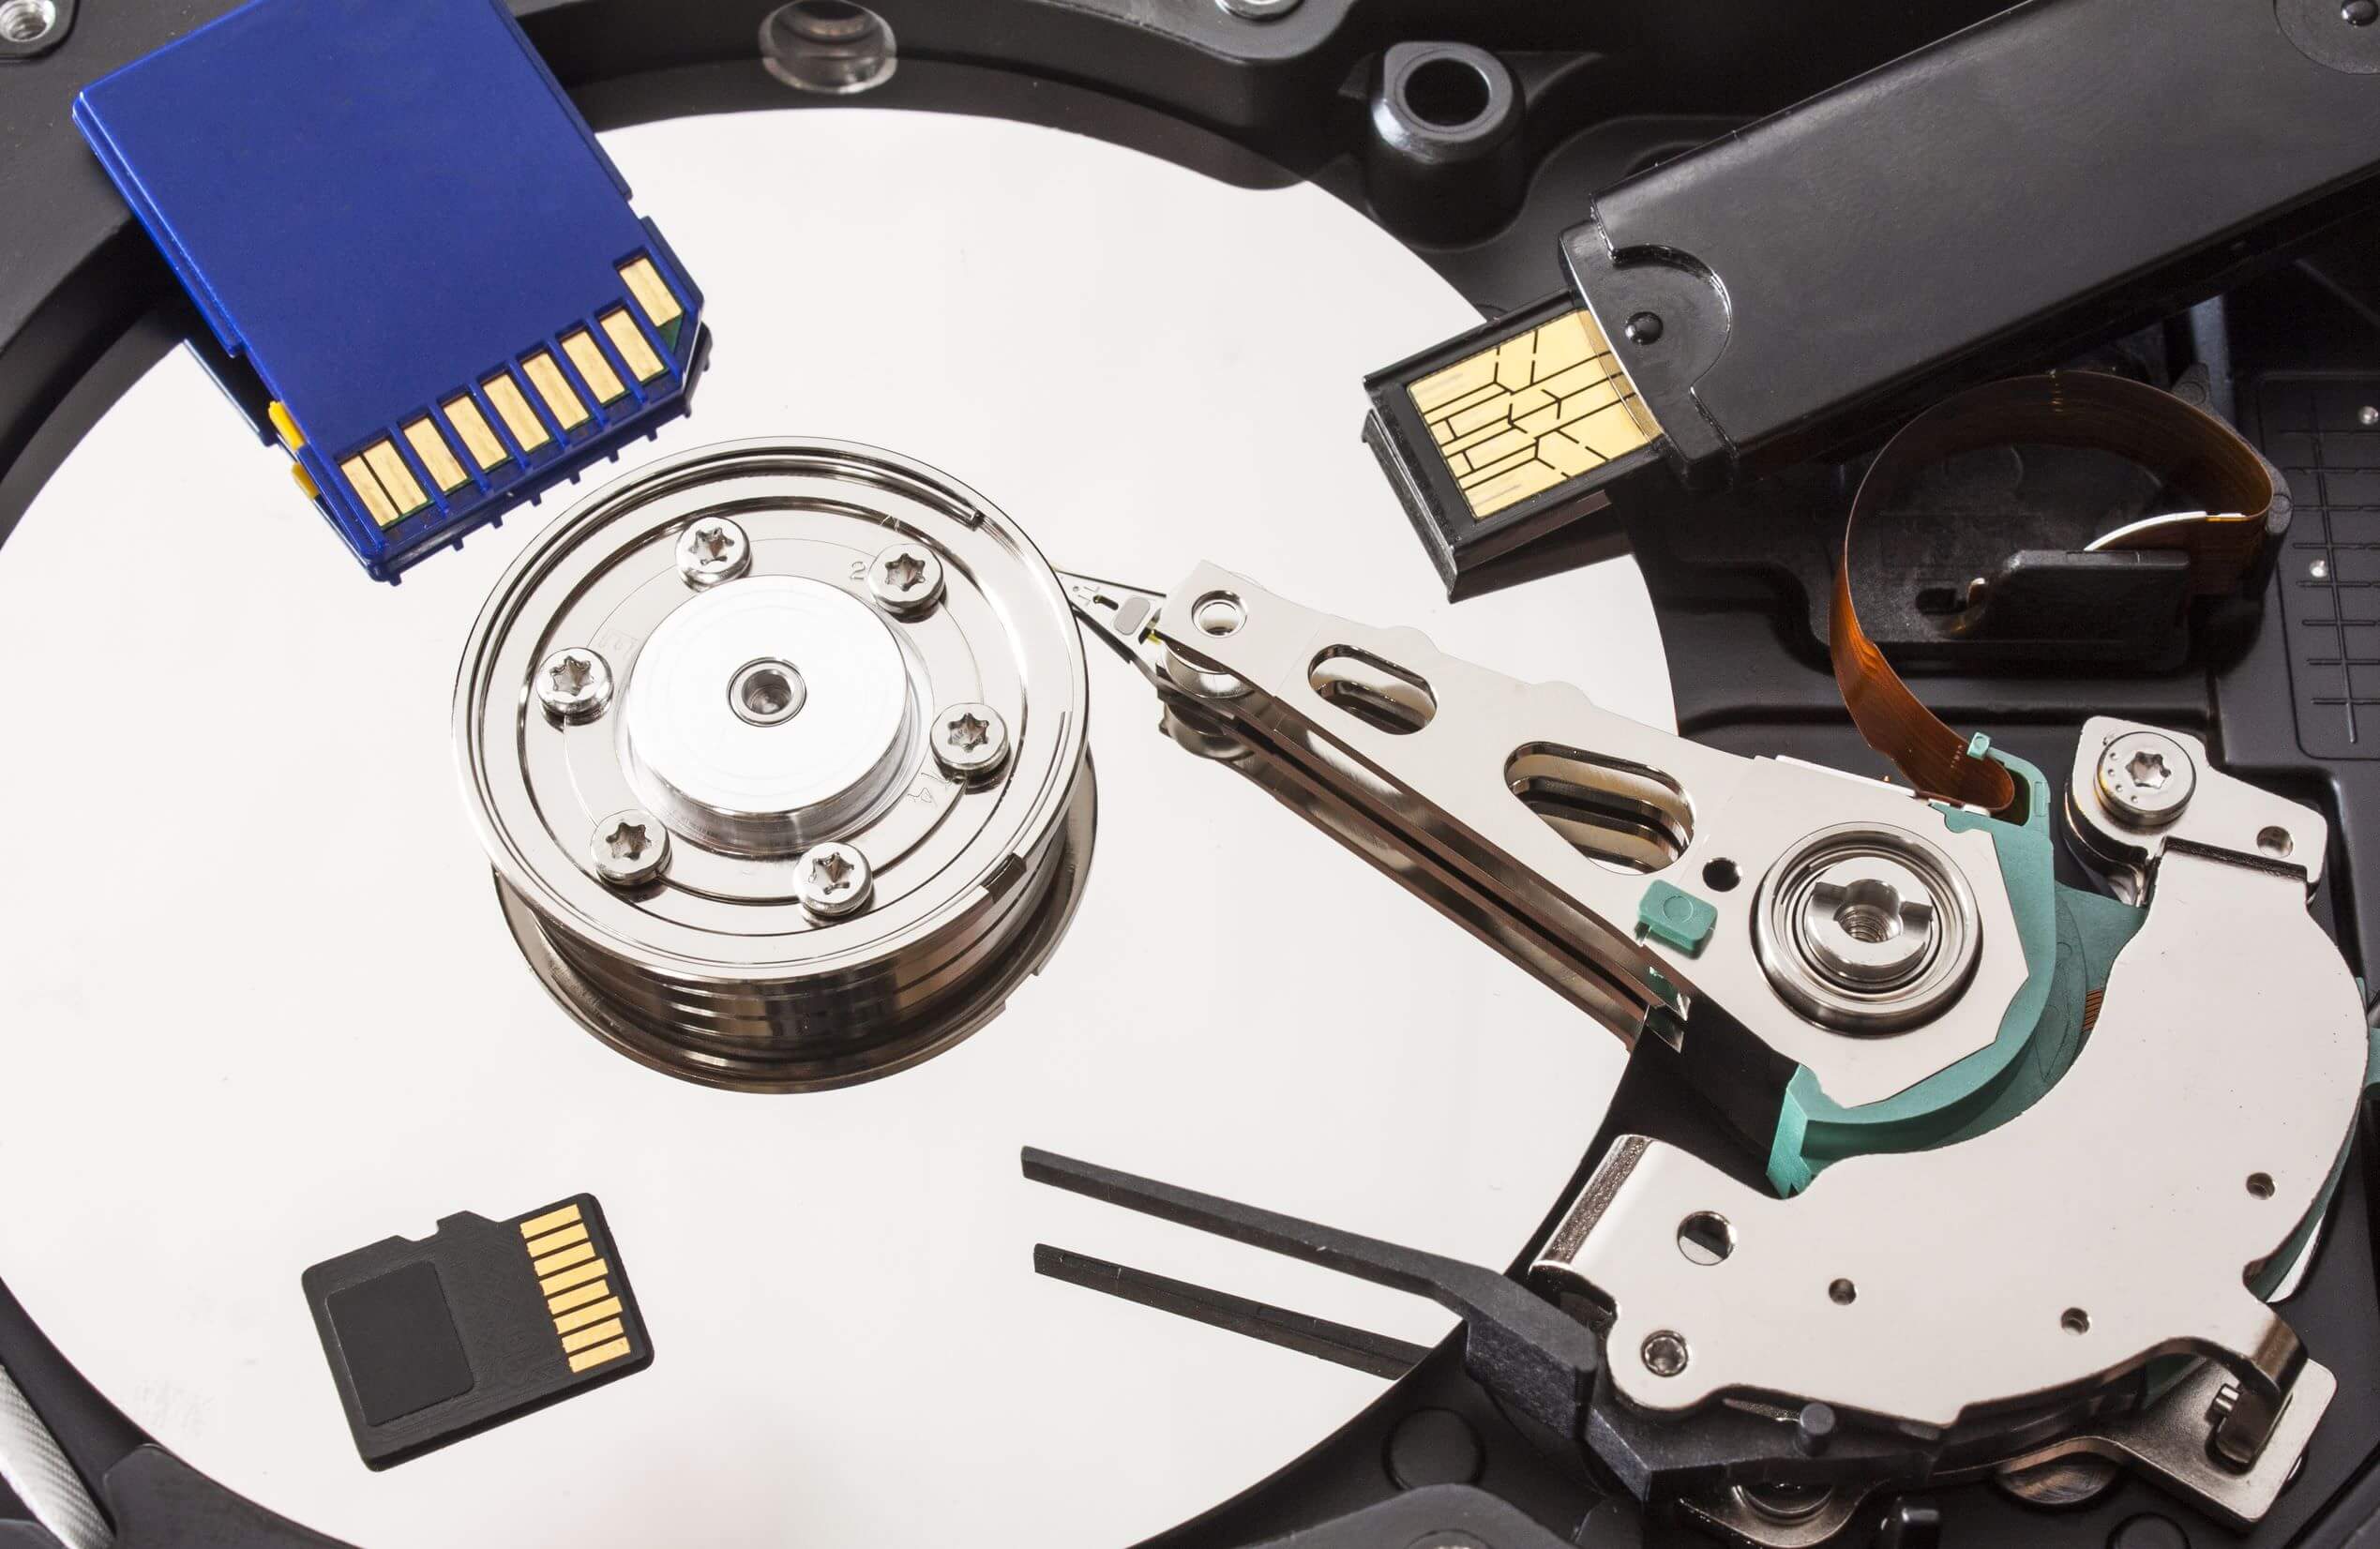 Data Recovery Deleted Photos From Hard Drive￼